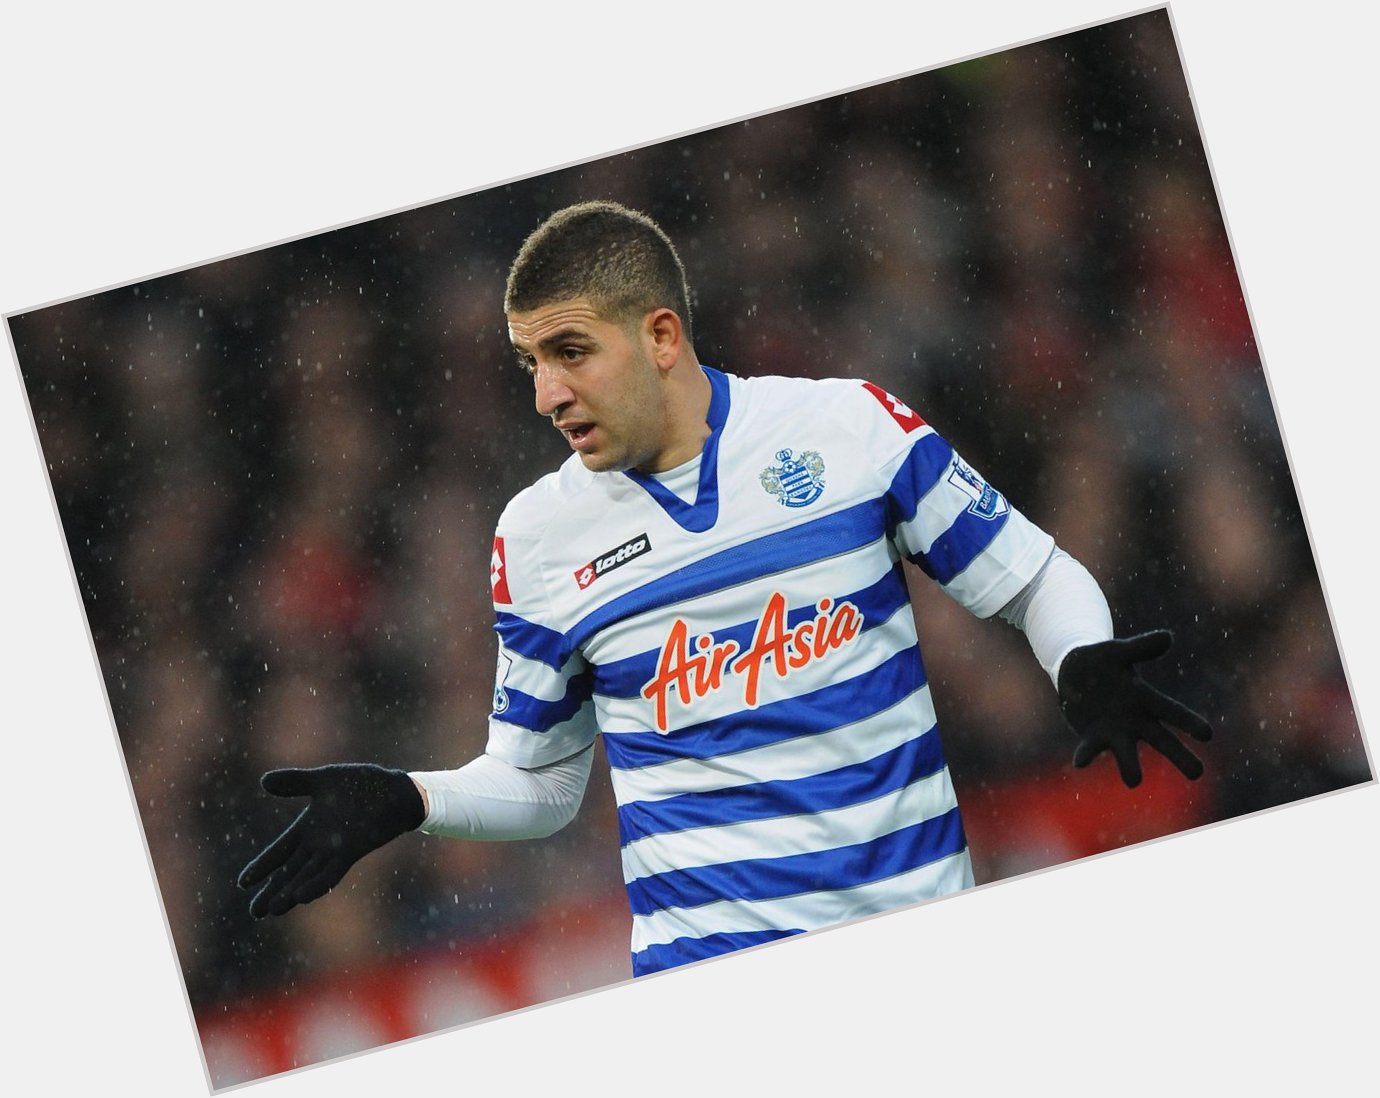 Happy birthday to Adel Taarabt! Will never forget those QPR days! 